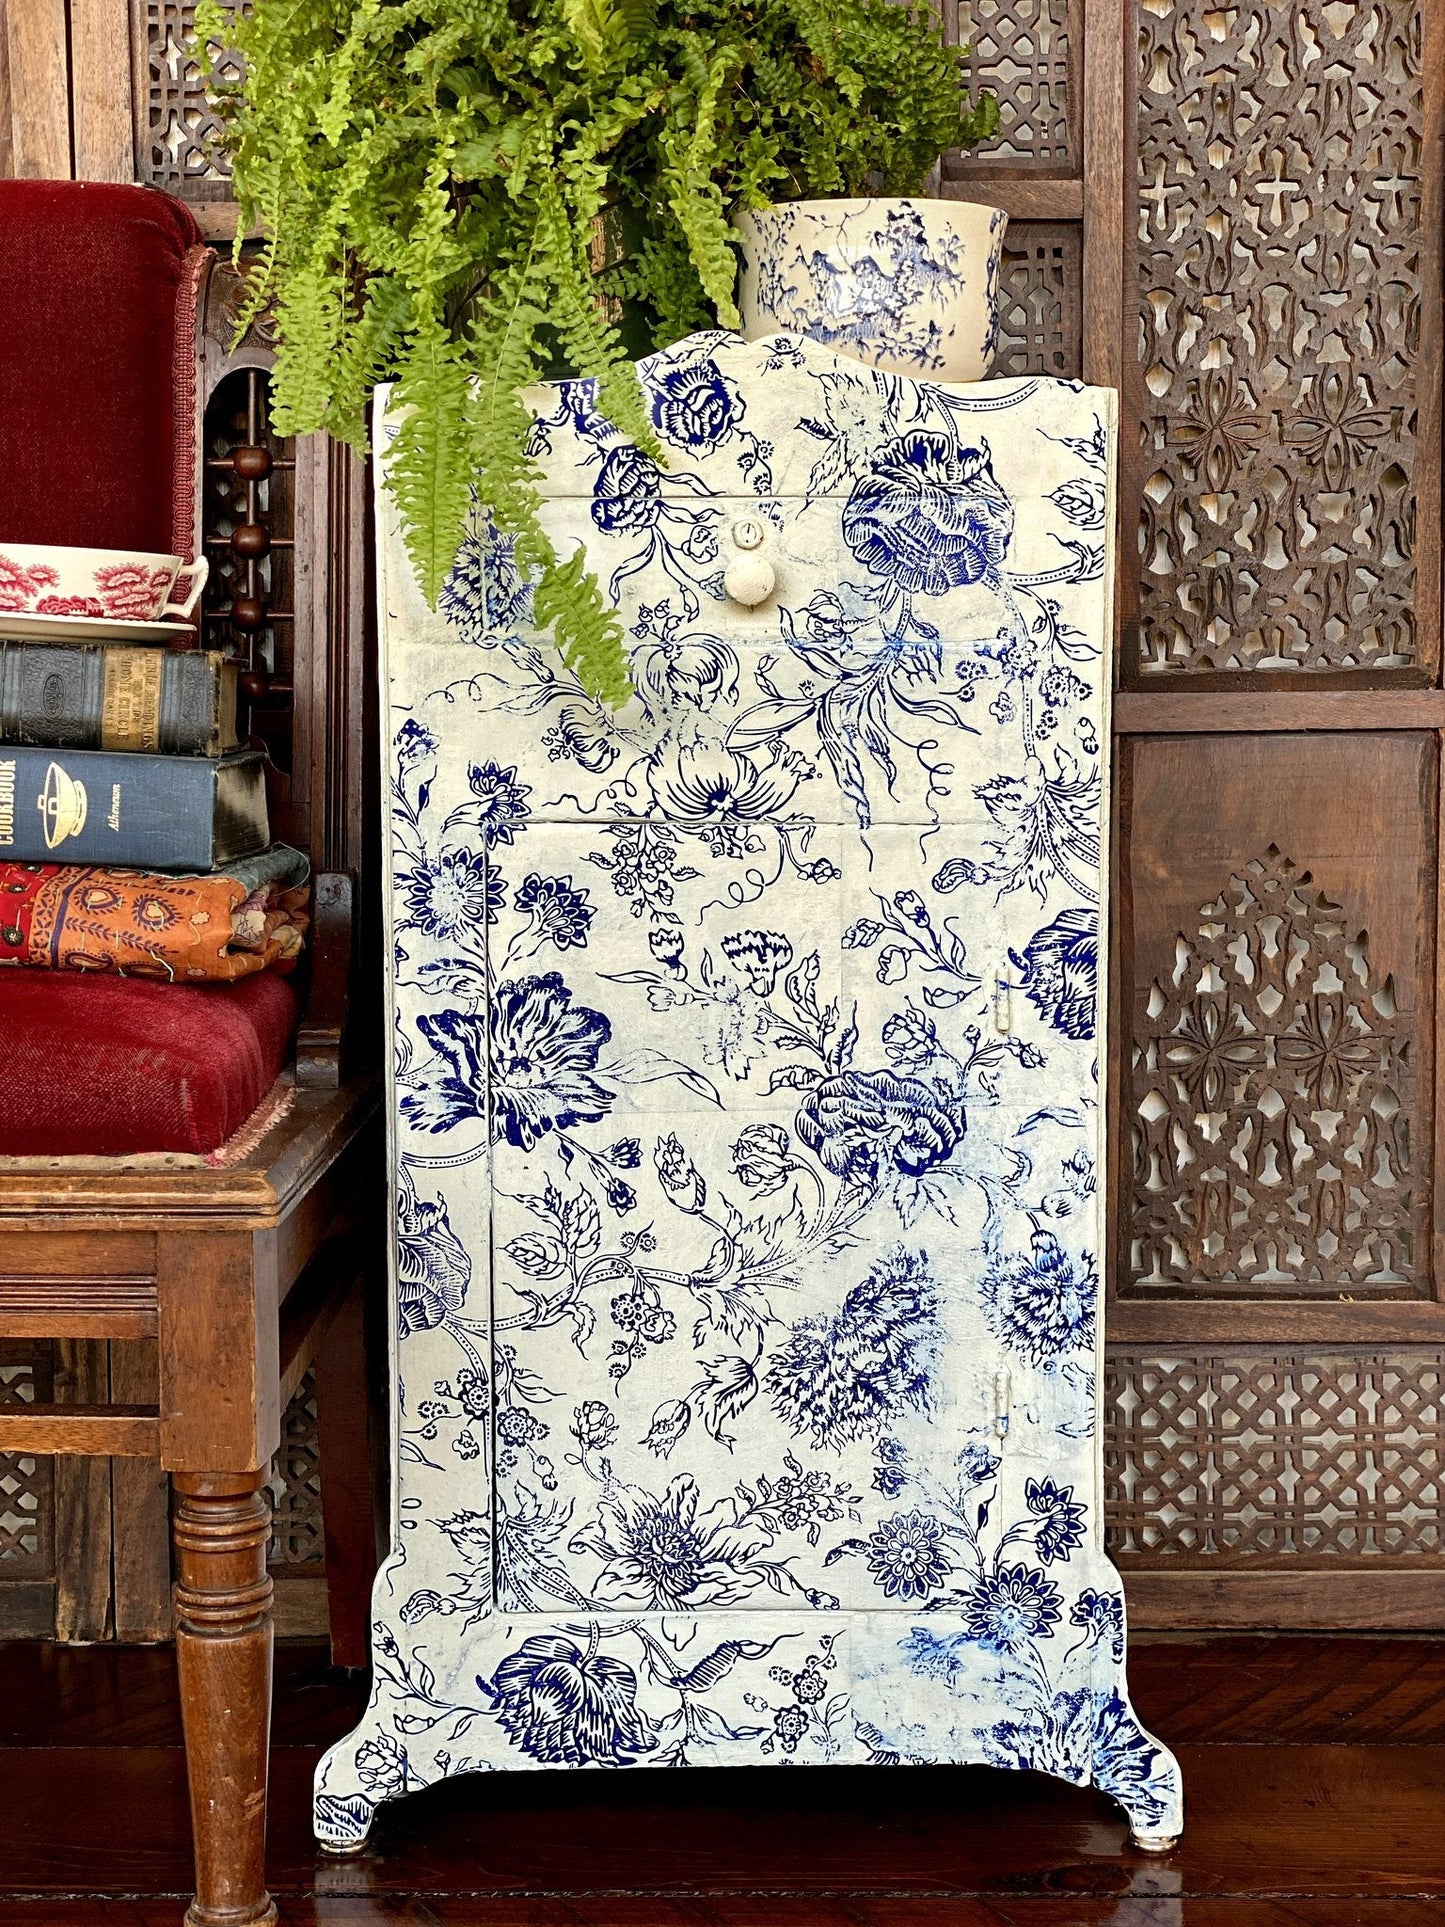 Iron Orchid Designs - Indigo Floral Paint Inlay - Rustic River Home